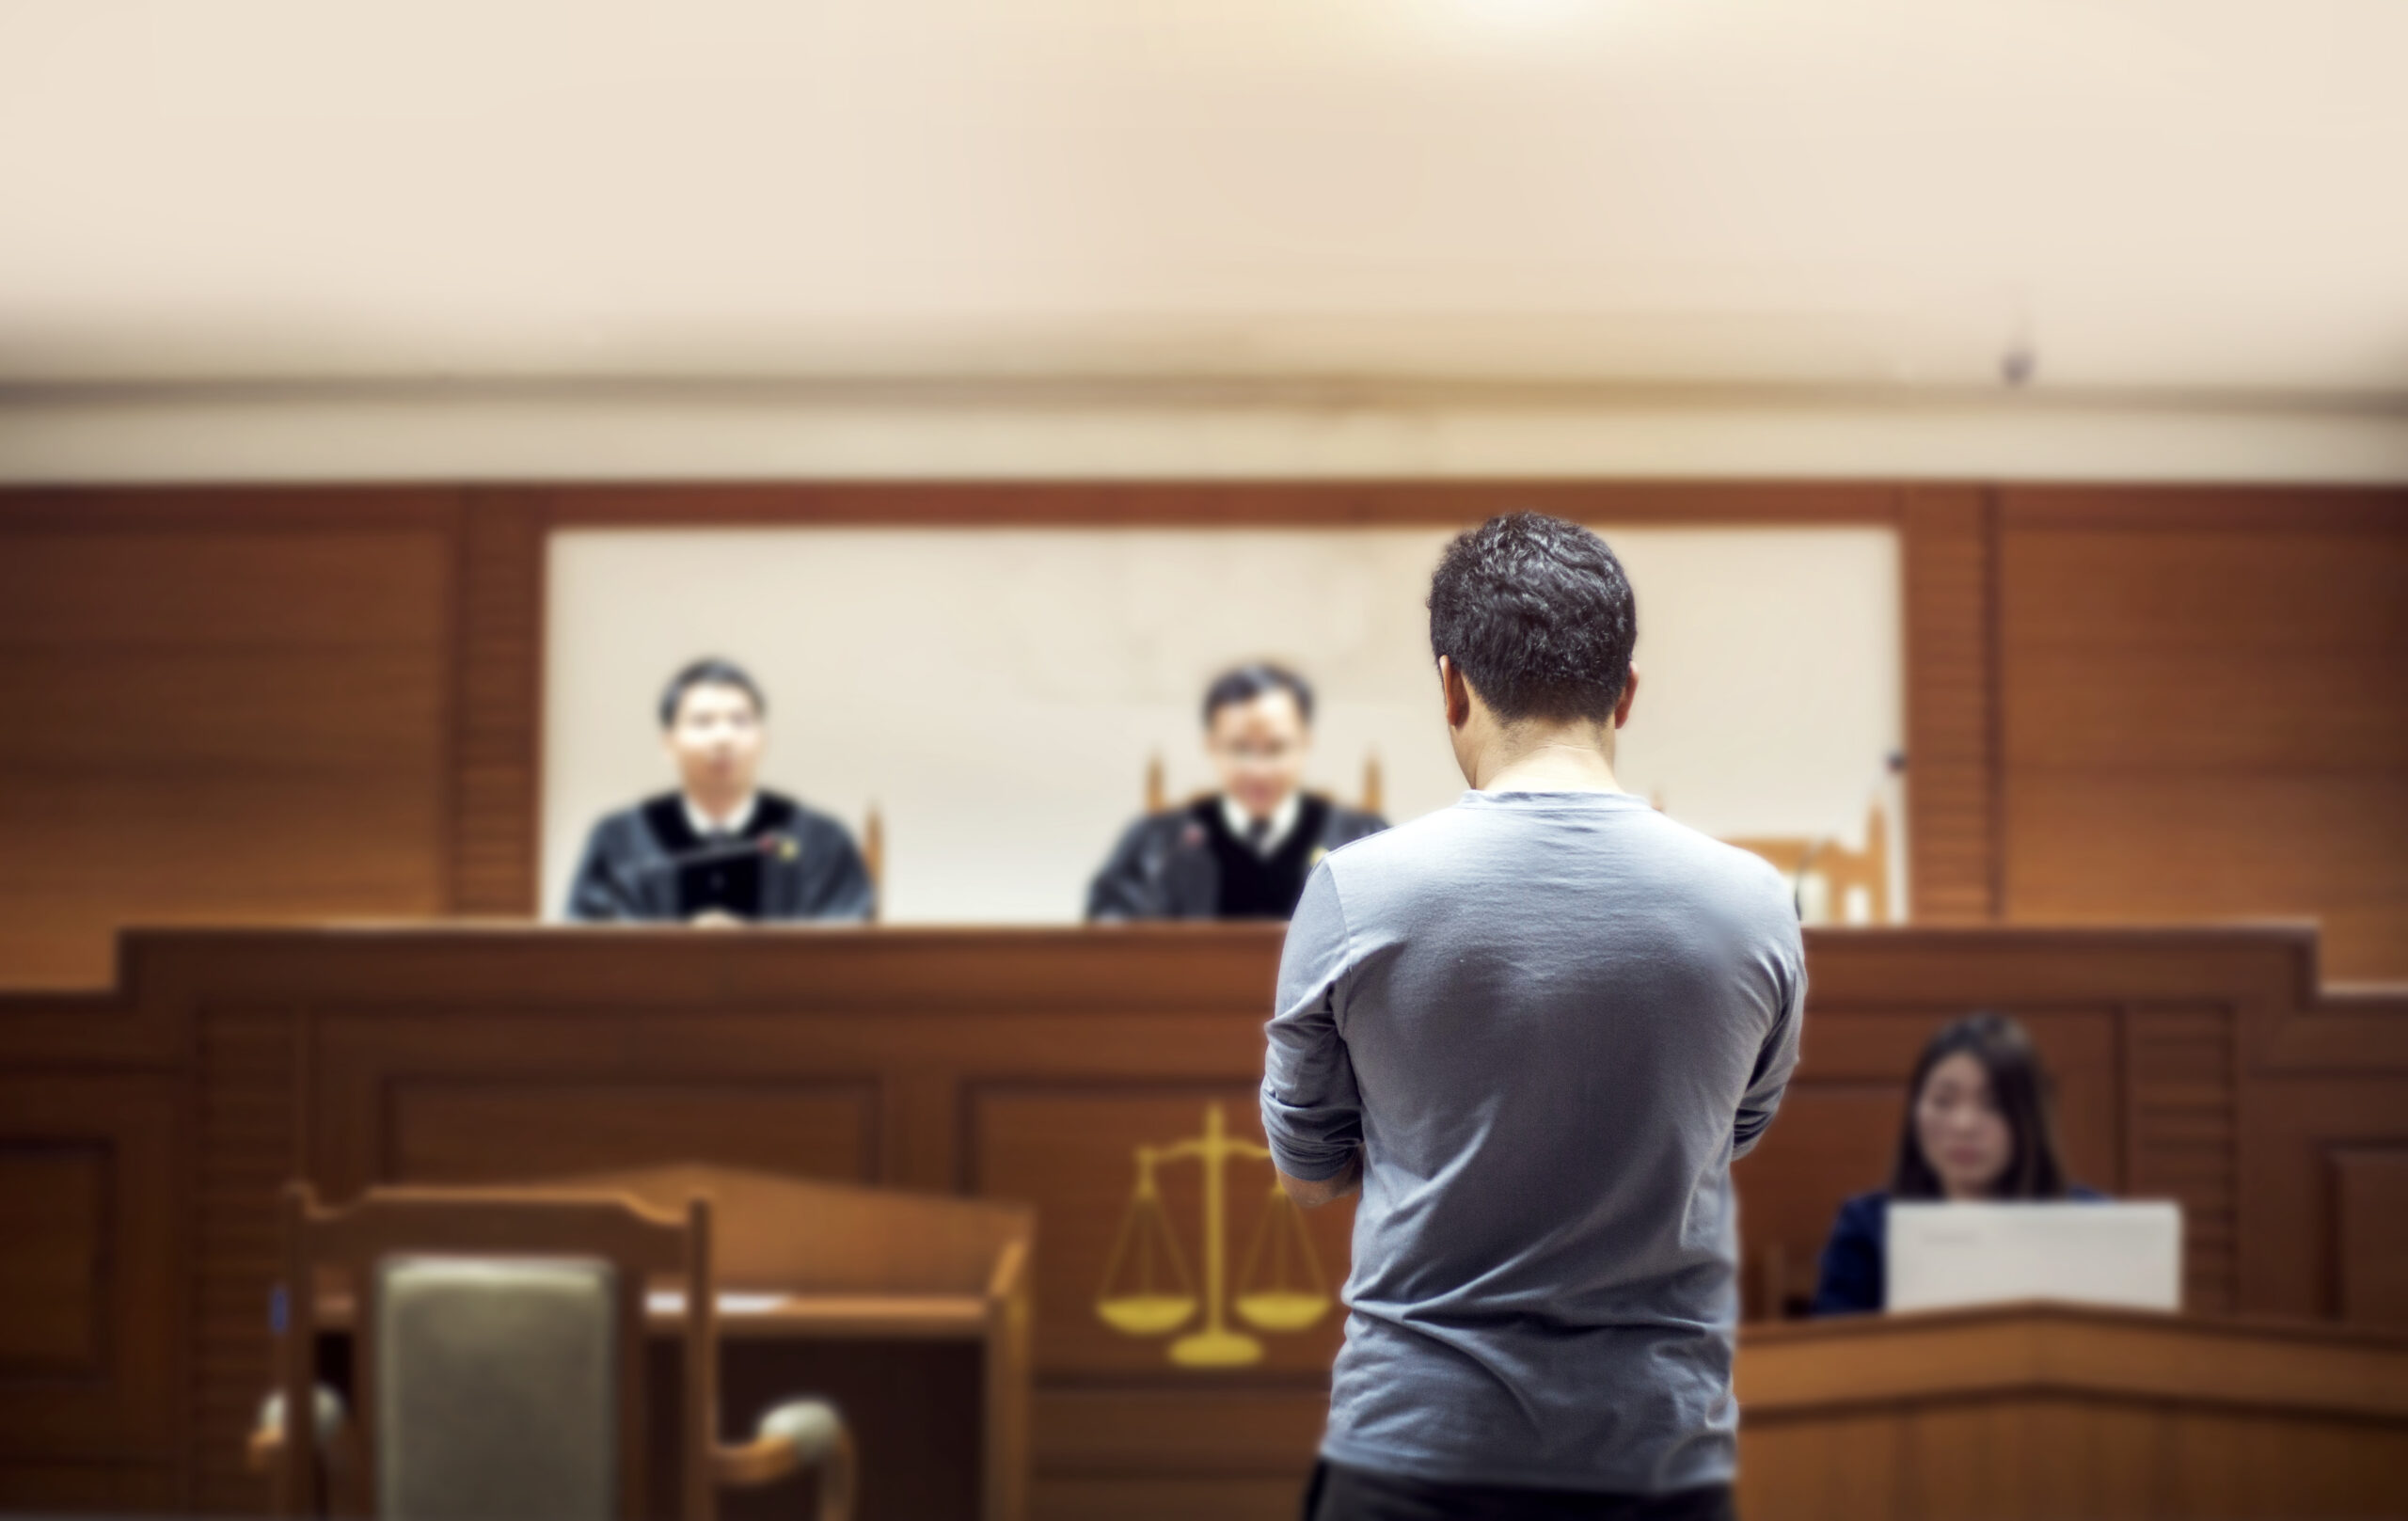 A car accident plaintiff in a courtroom.